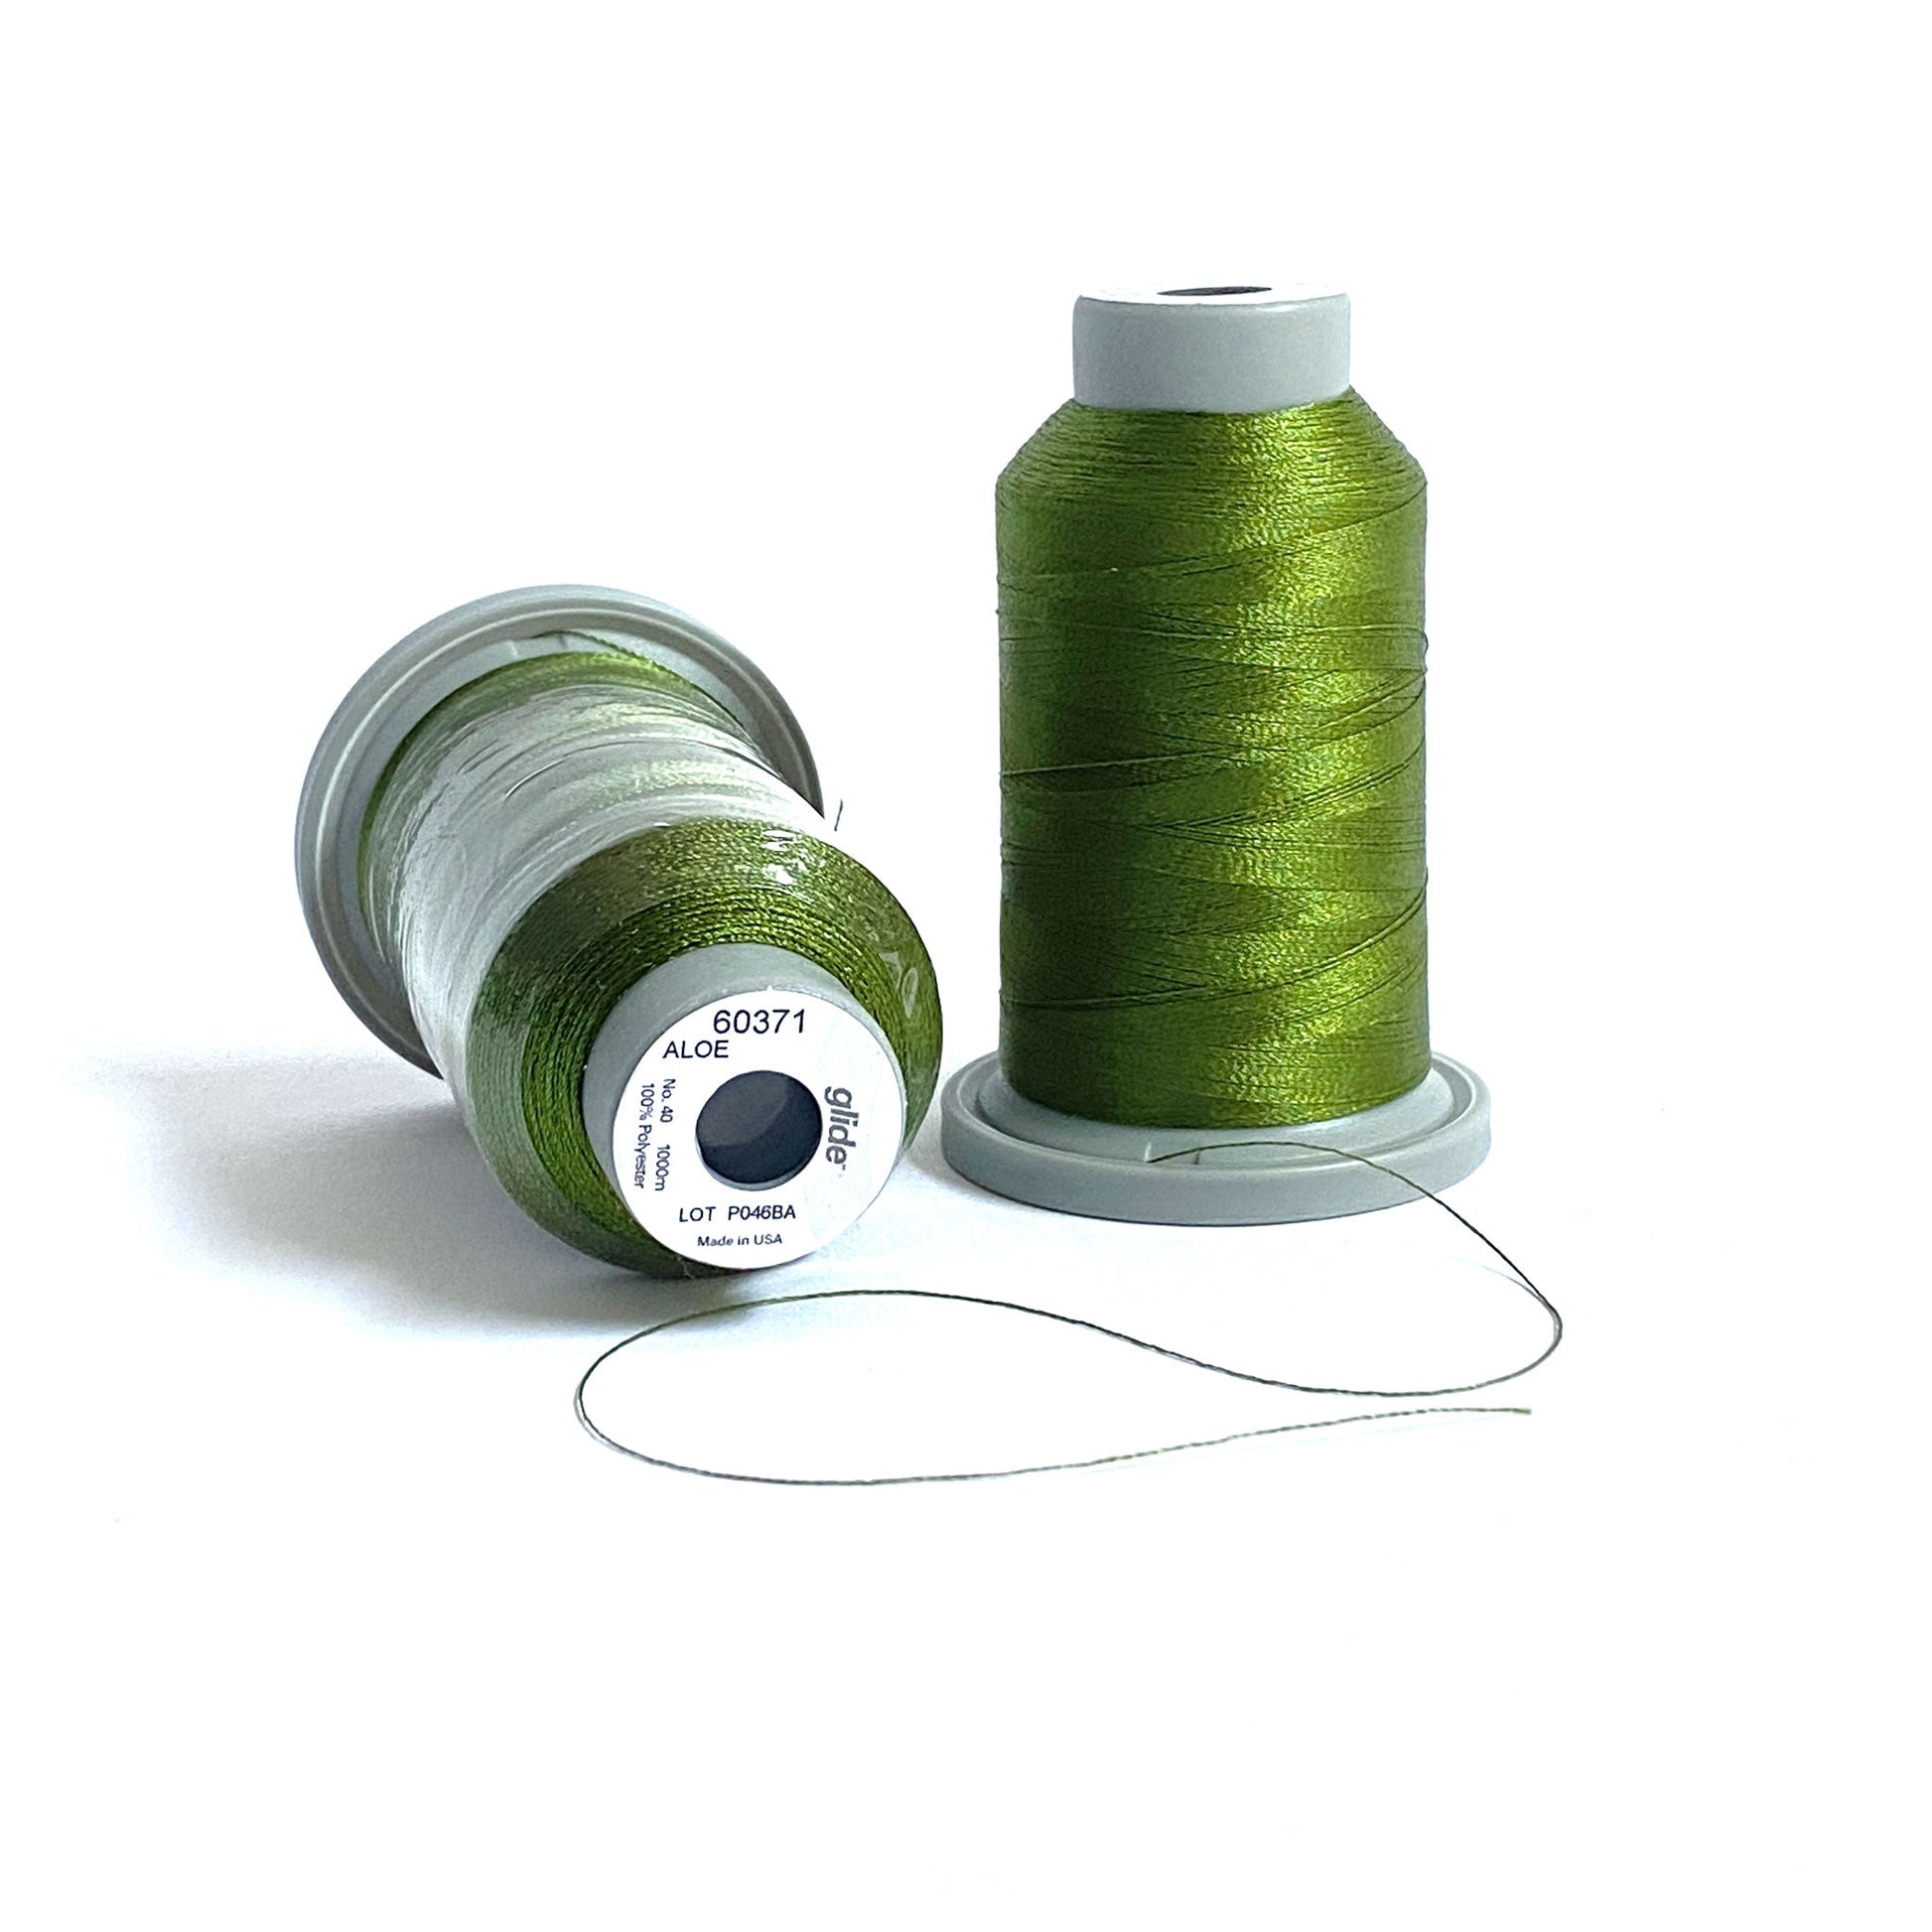 Glide 40 wt. TRilobal polyester thread by Fil-Tec offers superior strength, consitency, and coverage. Aloe (60371) is a medium to dark green, perfect for adding contrast to deep green leaves. Stitcher's Joy